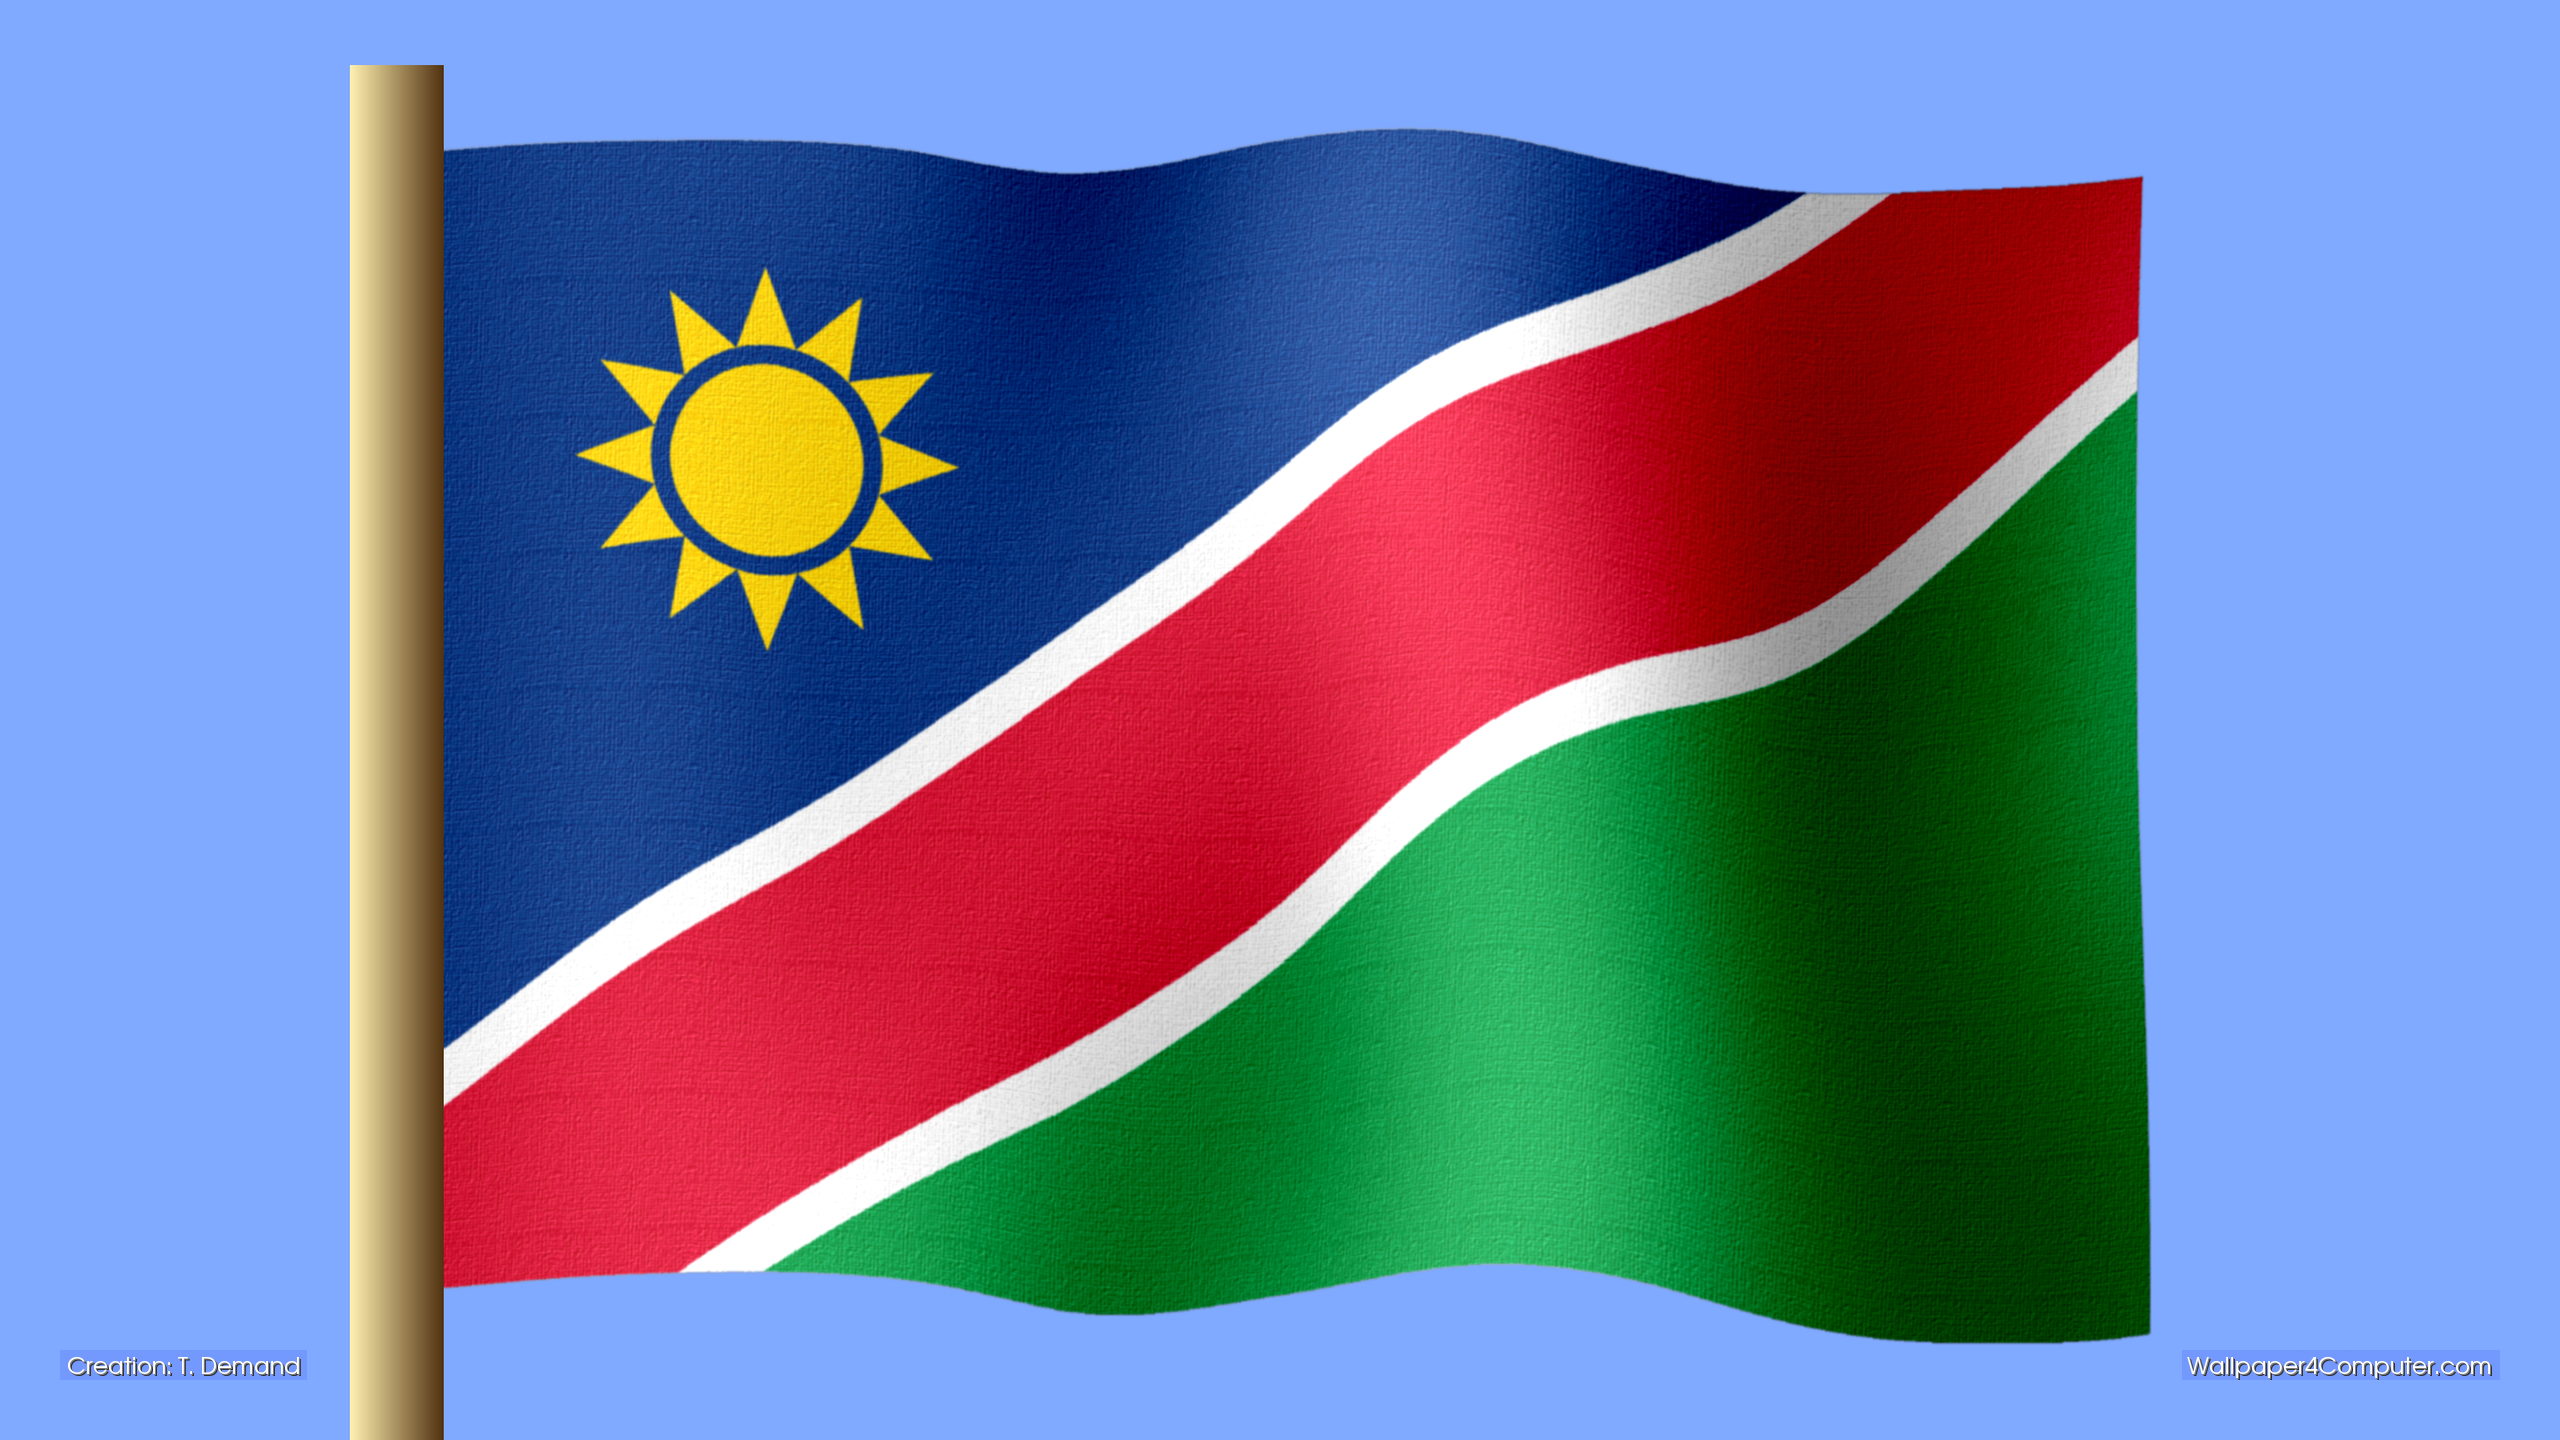 Wallpaper For Computer - Namibian National Anthem In Afrikaans , HD Wallpaper & Backgrounds